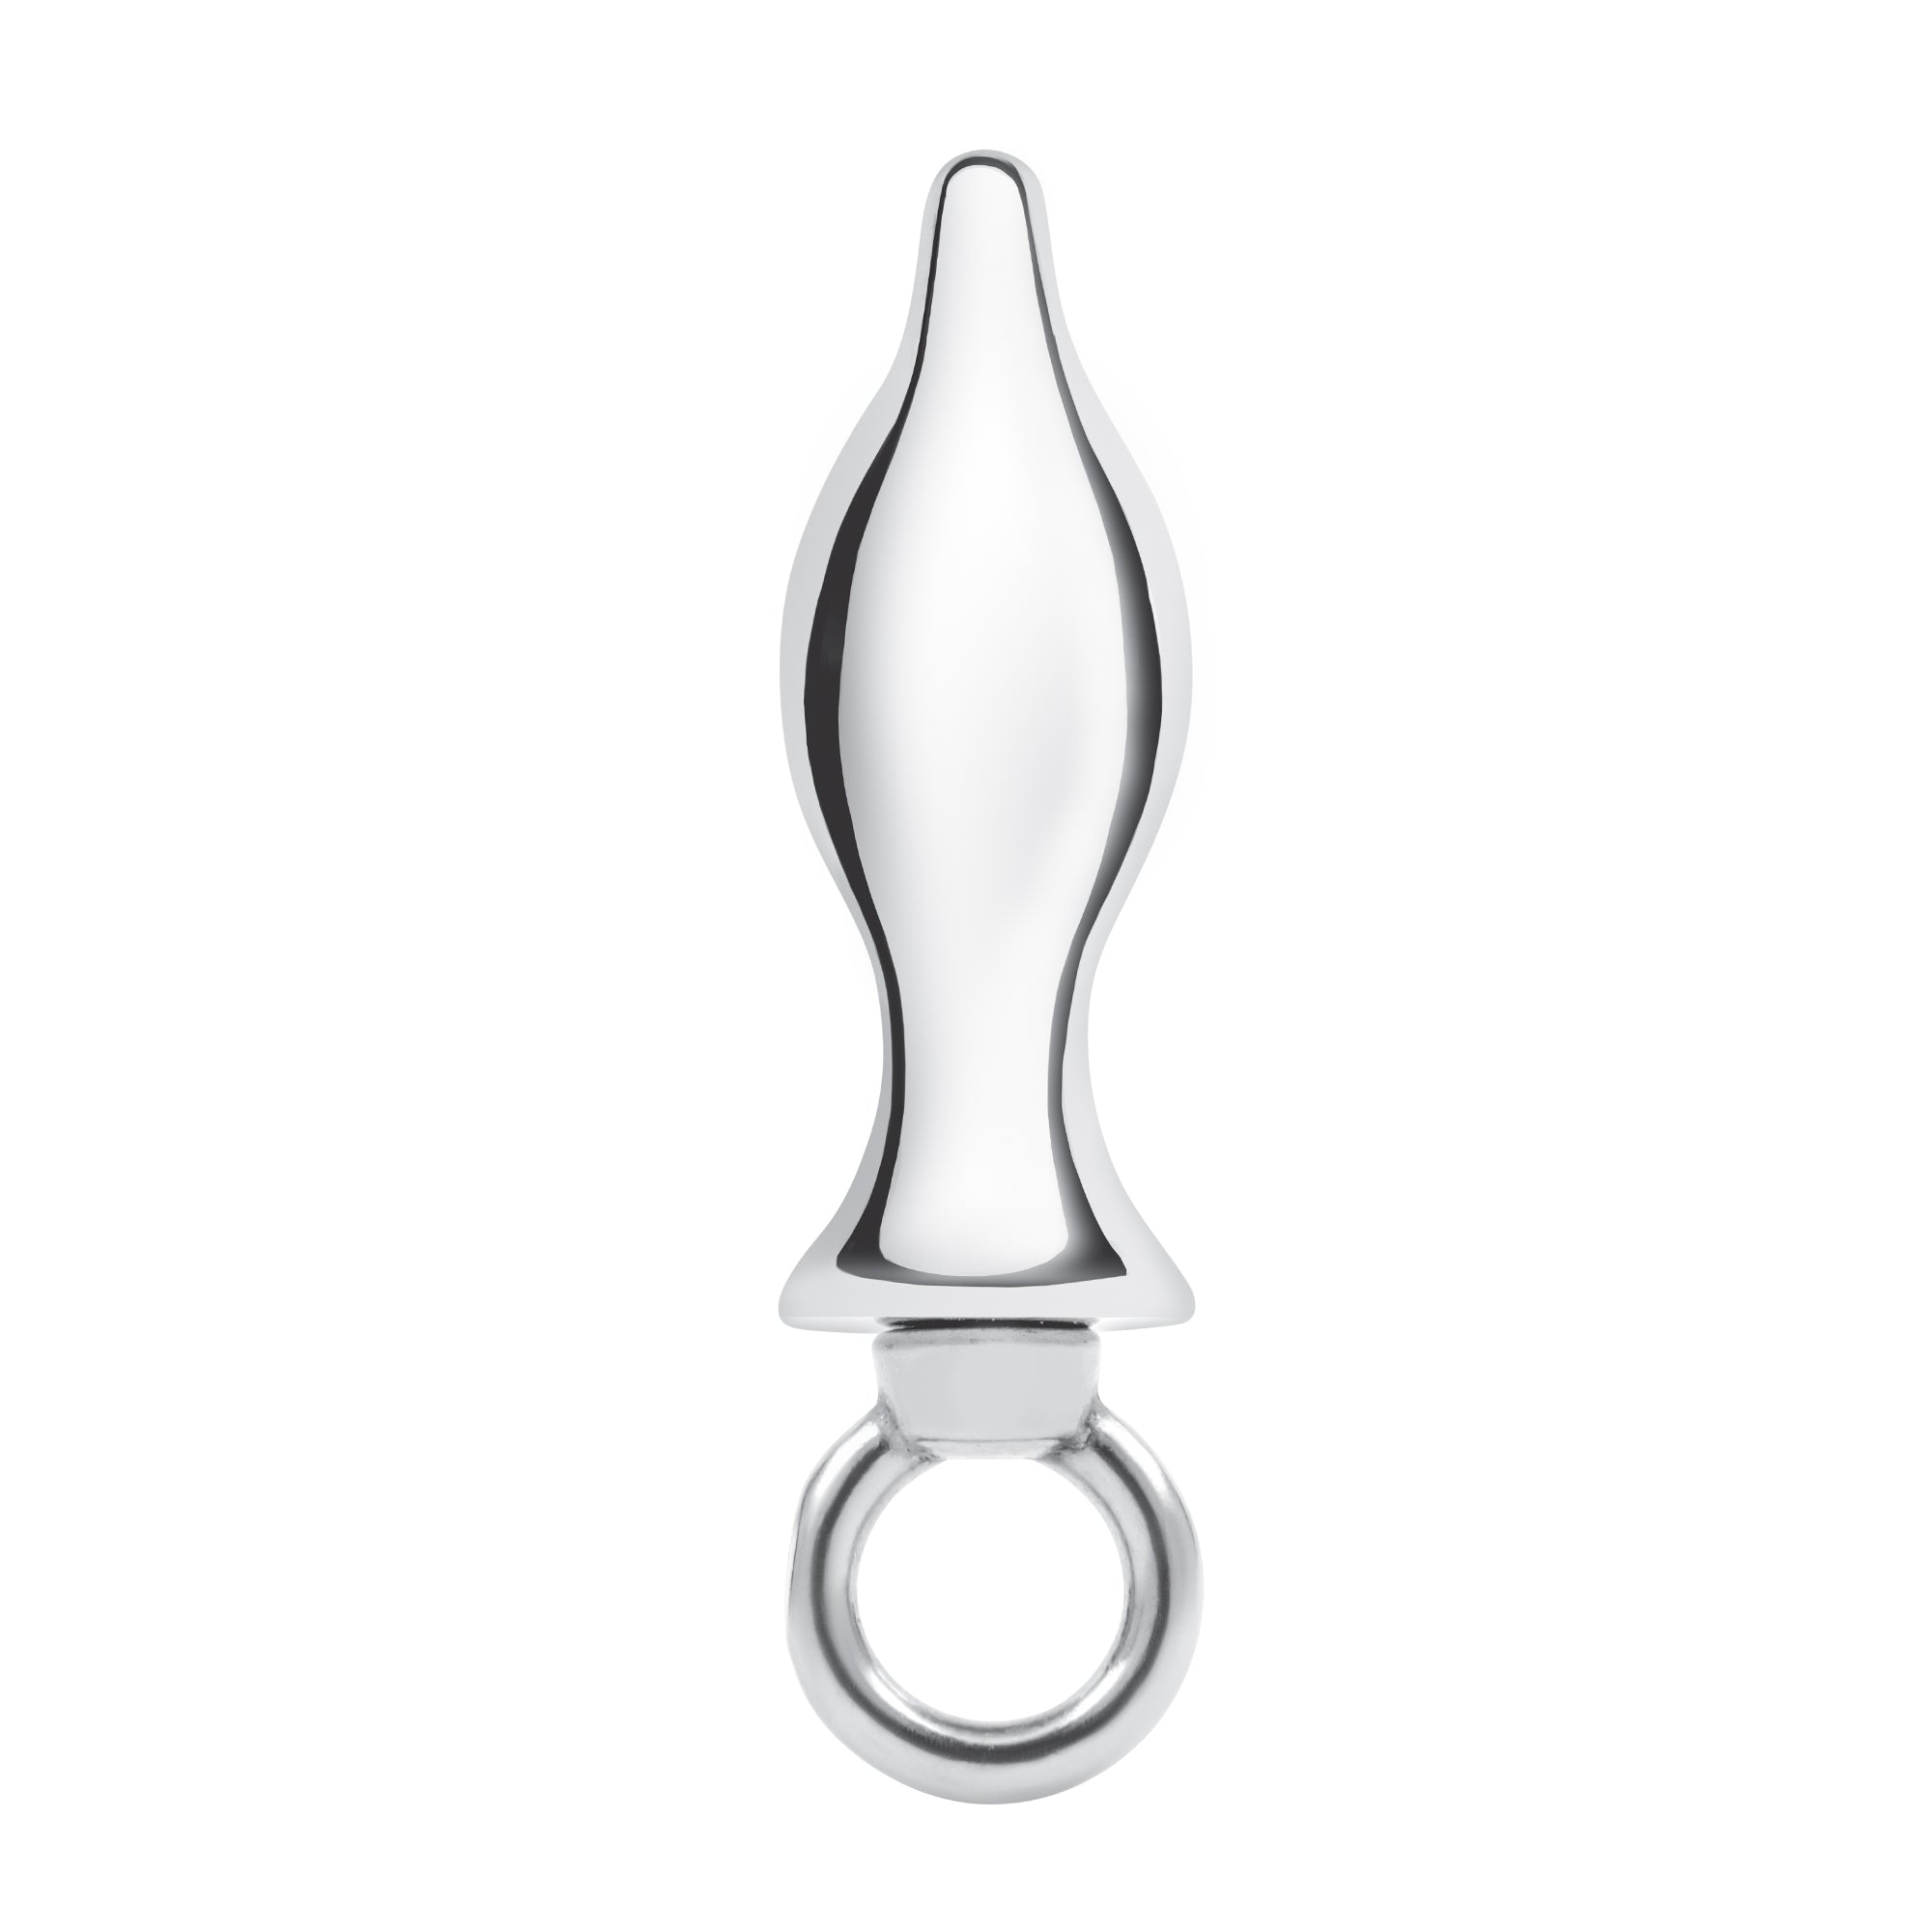 2.5" Stainless Steel Metal Tapered Butt Plug With Loop Hardware